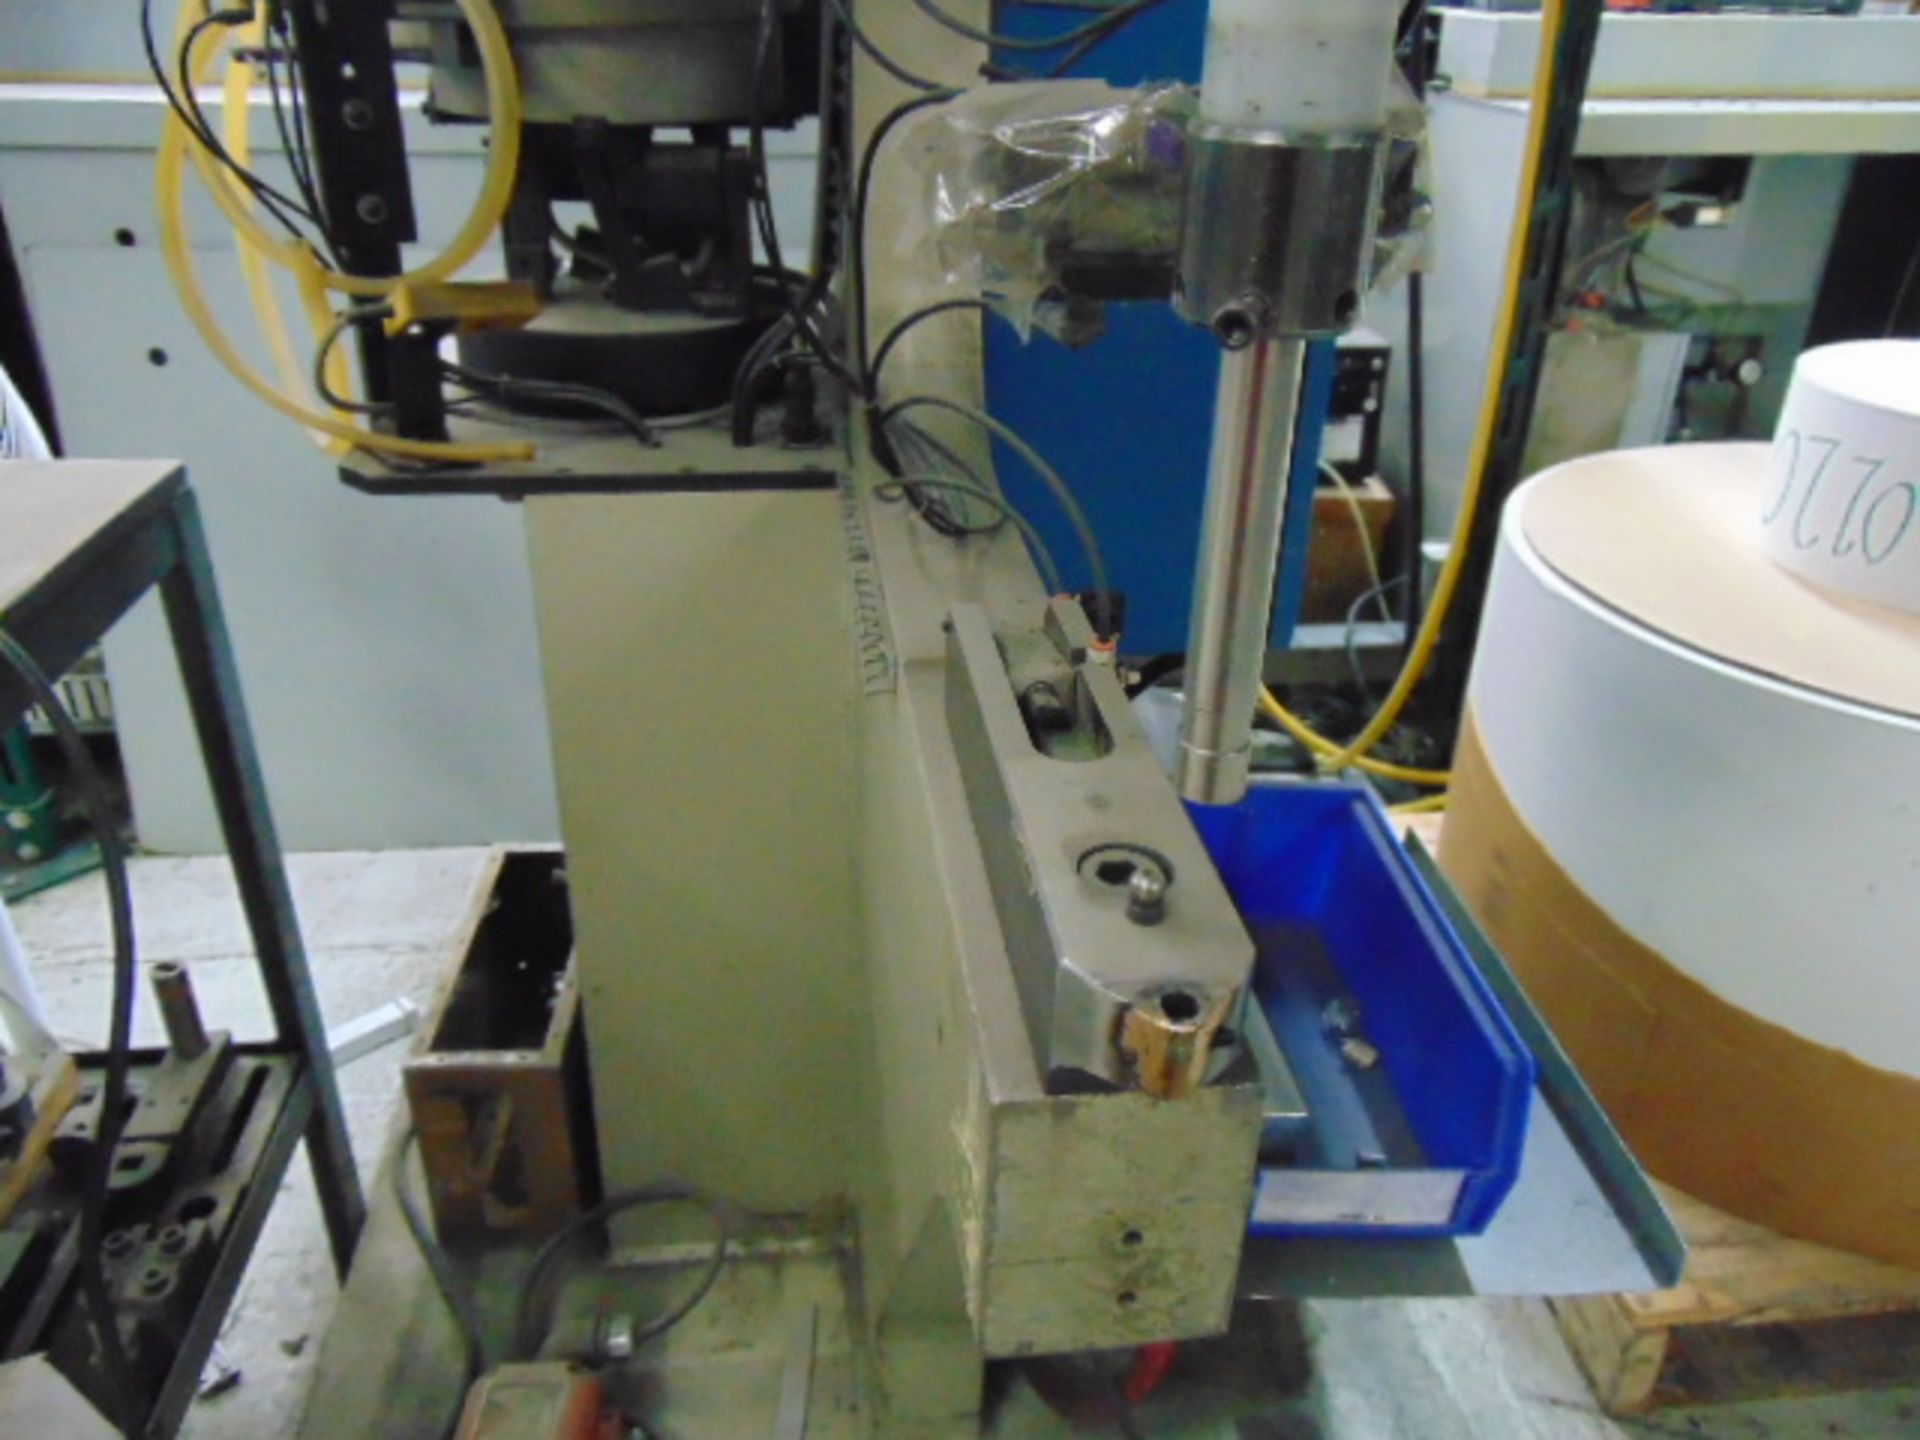 HARDWARE PRESS, PEMSERTER SERIES 2000A, new 1997, vibratory bowl feed, S/N 2002A-103 - Image 4 of 6